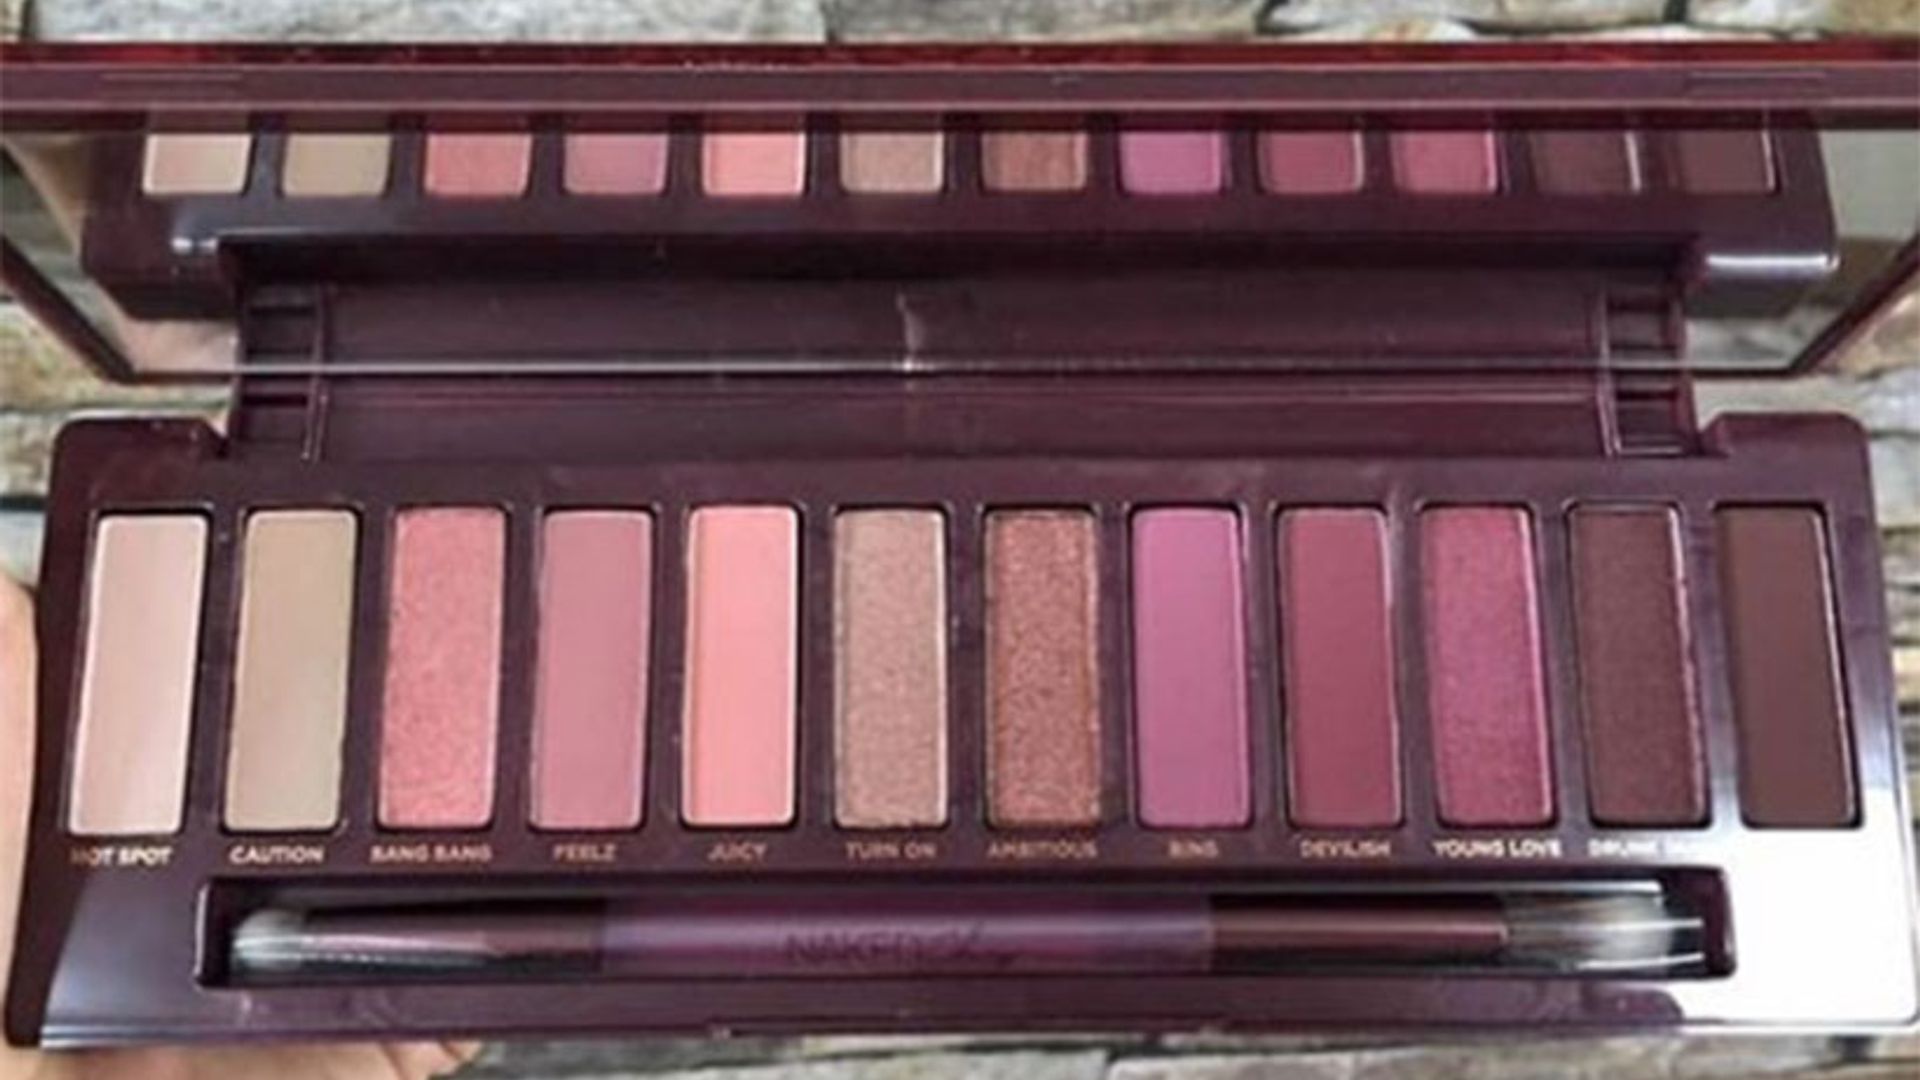 Urban Decay Naked Cherry Eyeshadow Palette Review & Swatches